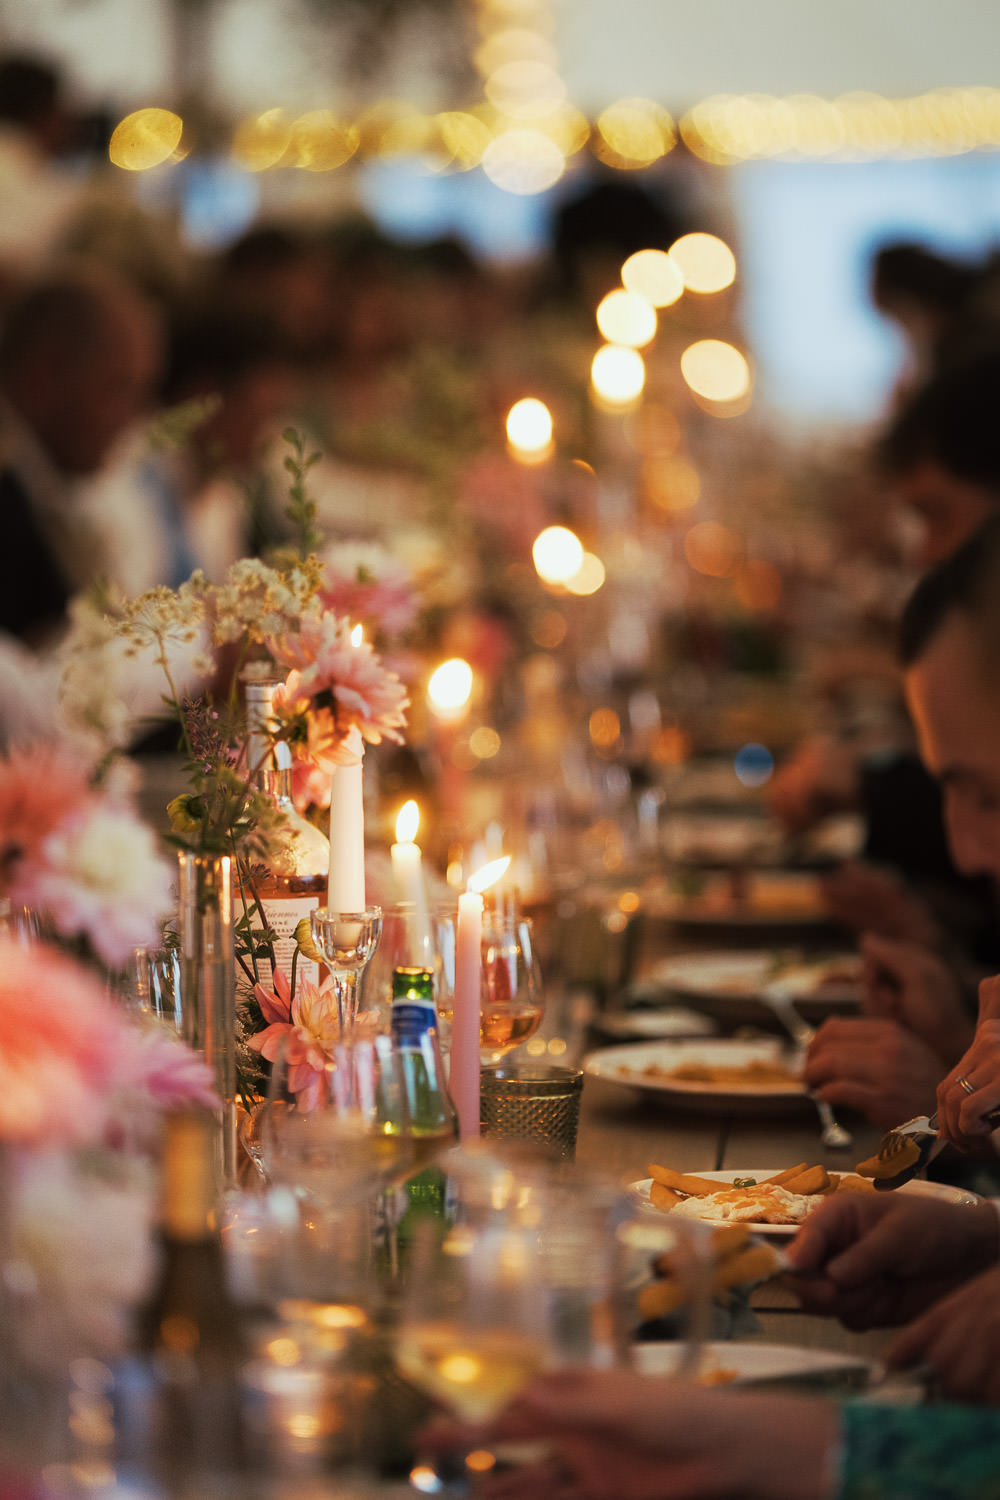 A row of people on a long table eating ham, egg, and chips from Anna Shutes Catering. The table is decorated with flowers and candles.